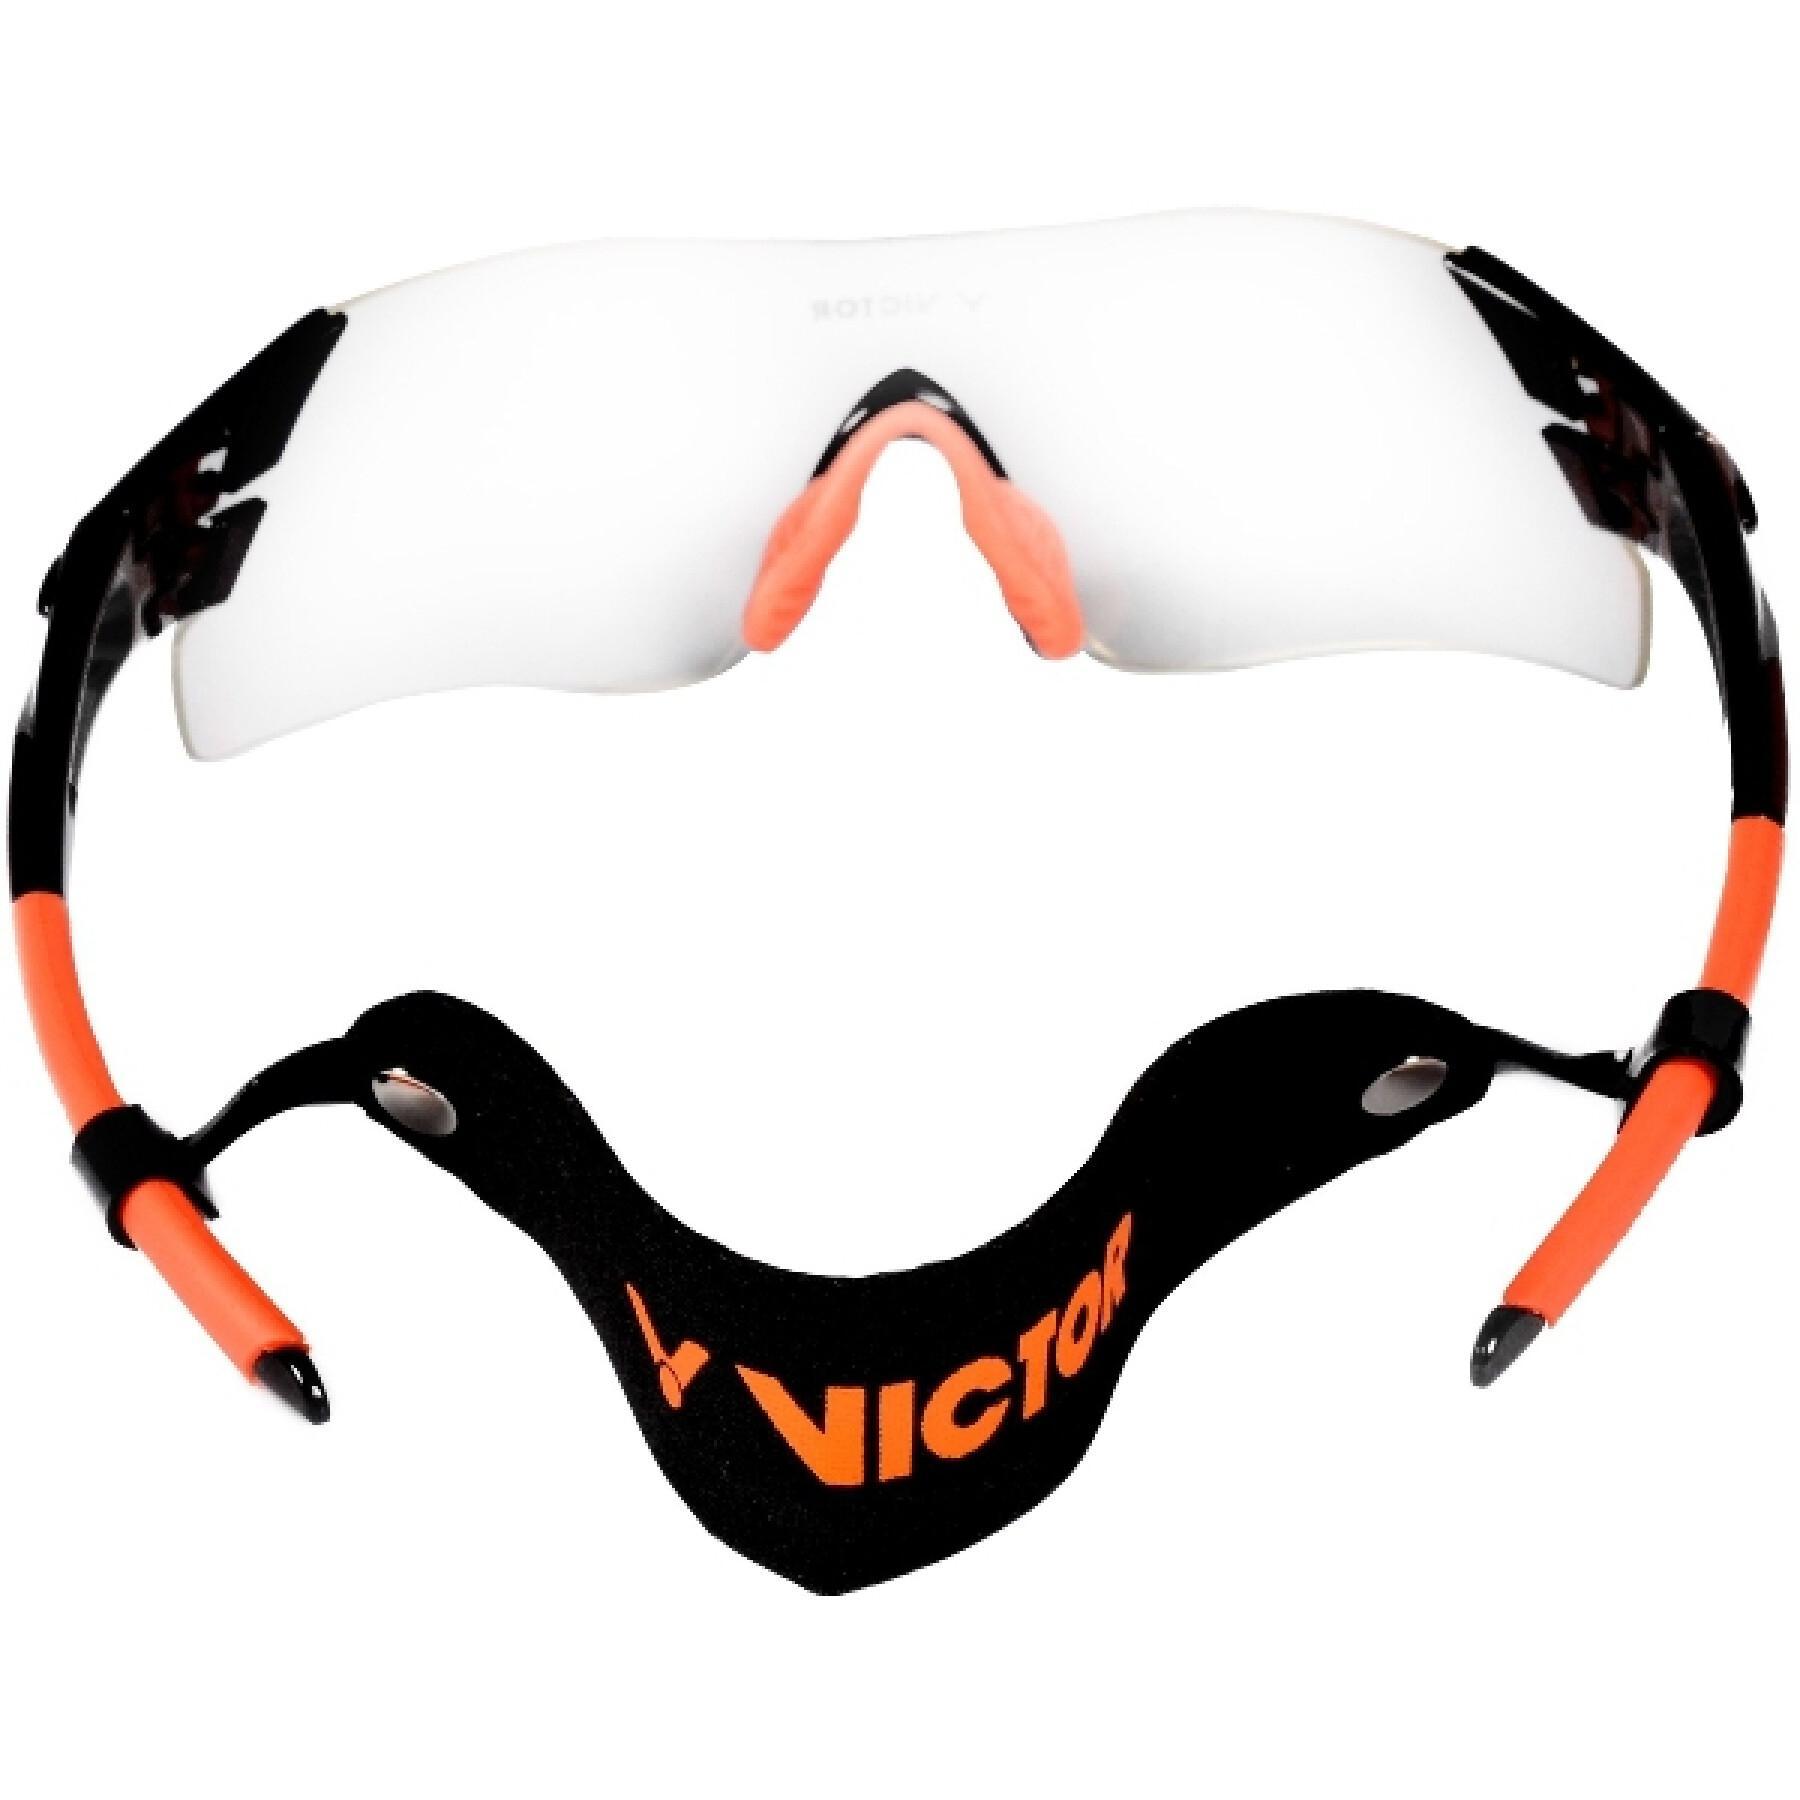 Victor Squash Schutzbrille One size Orange Sports Glasses Official New Band 